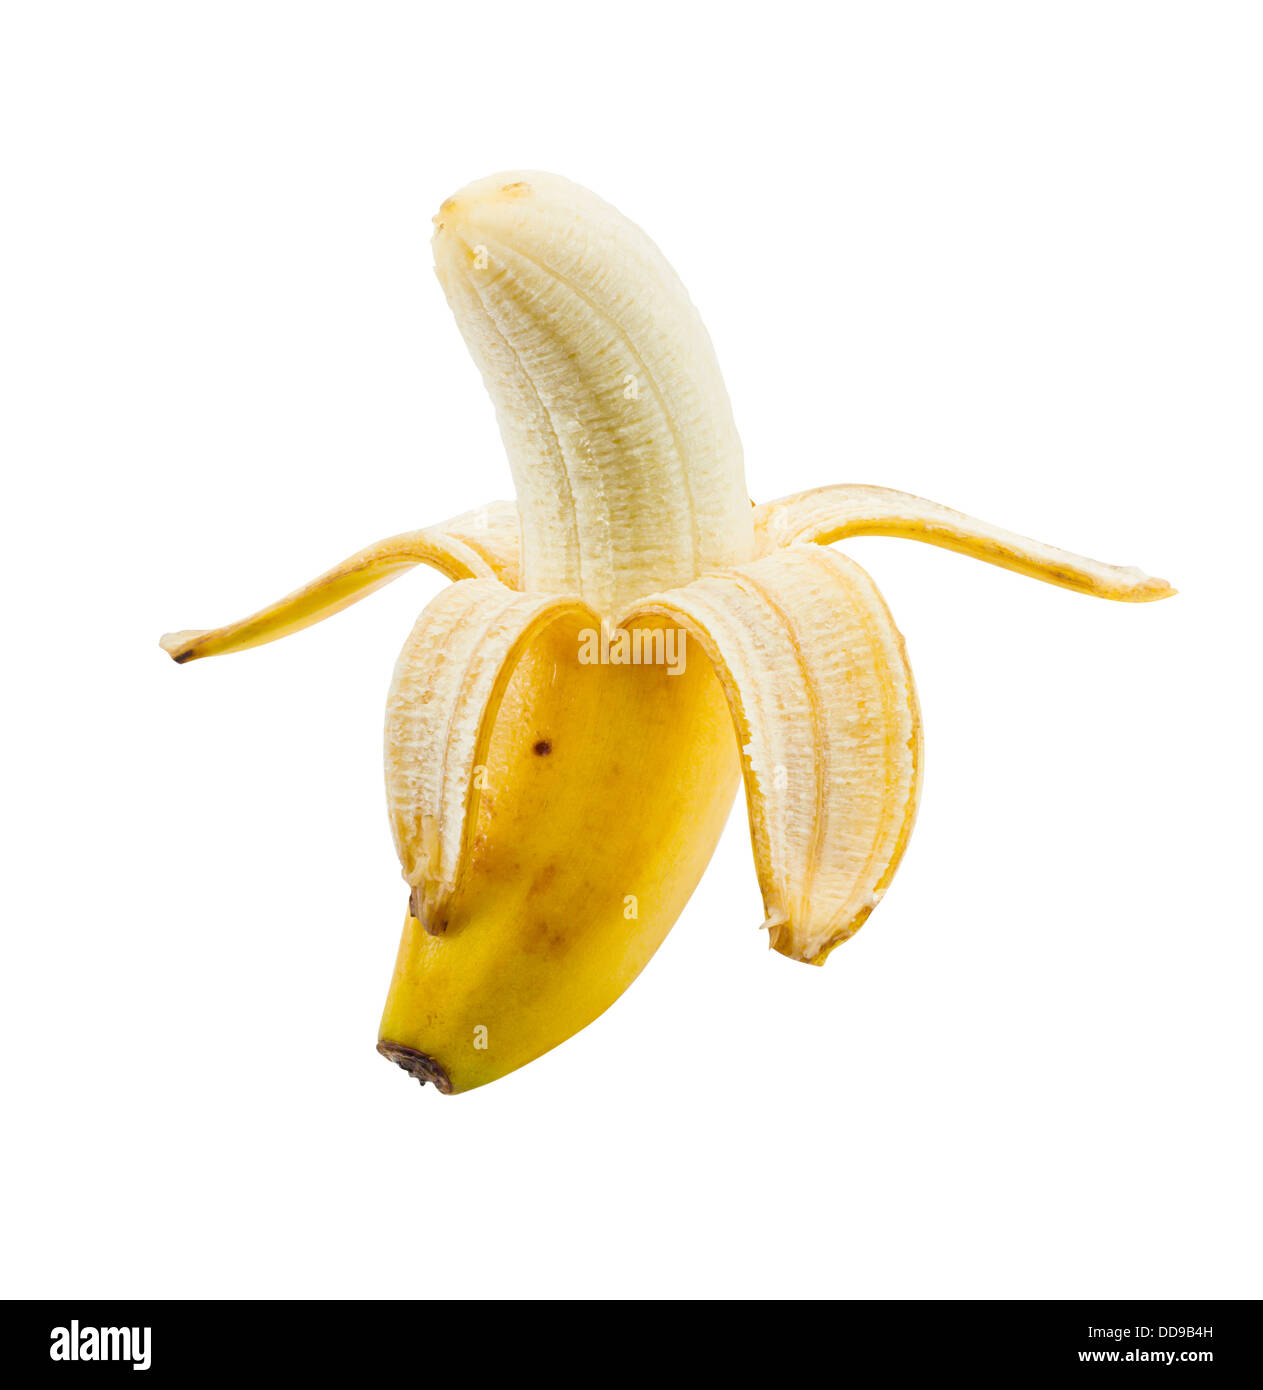 small lunch box sized banana peeled and isolated on a white background Stock Photo